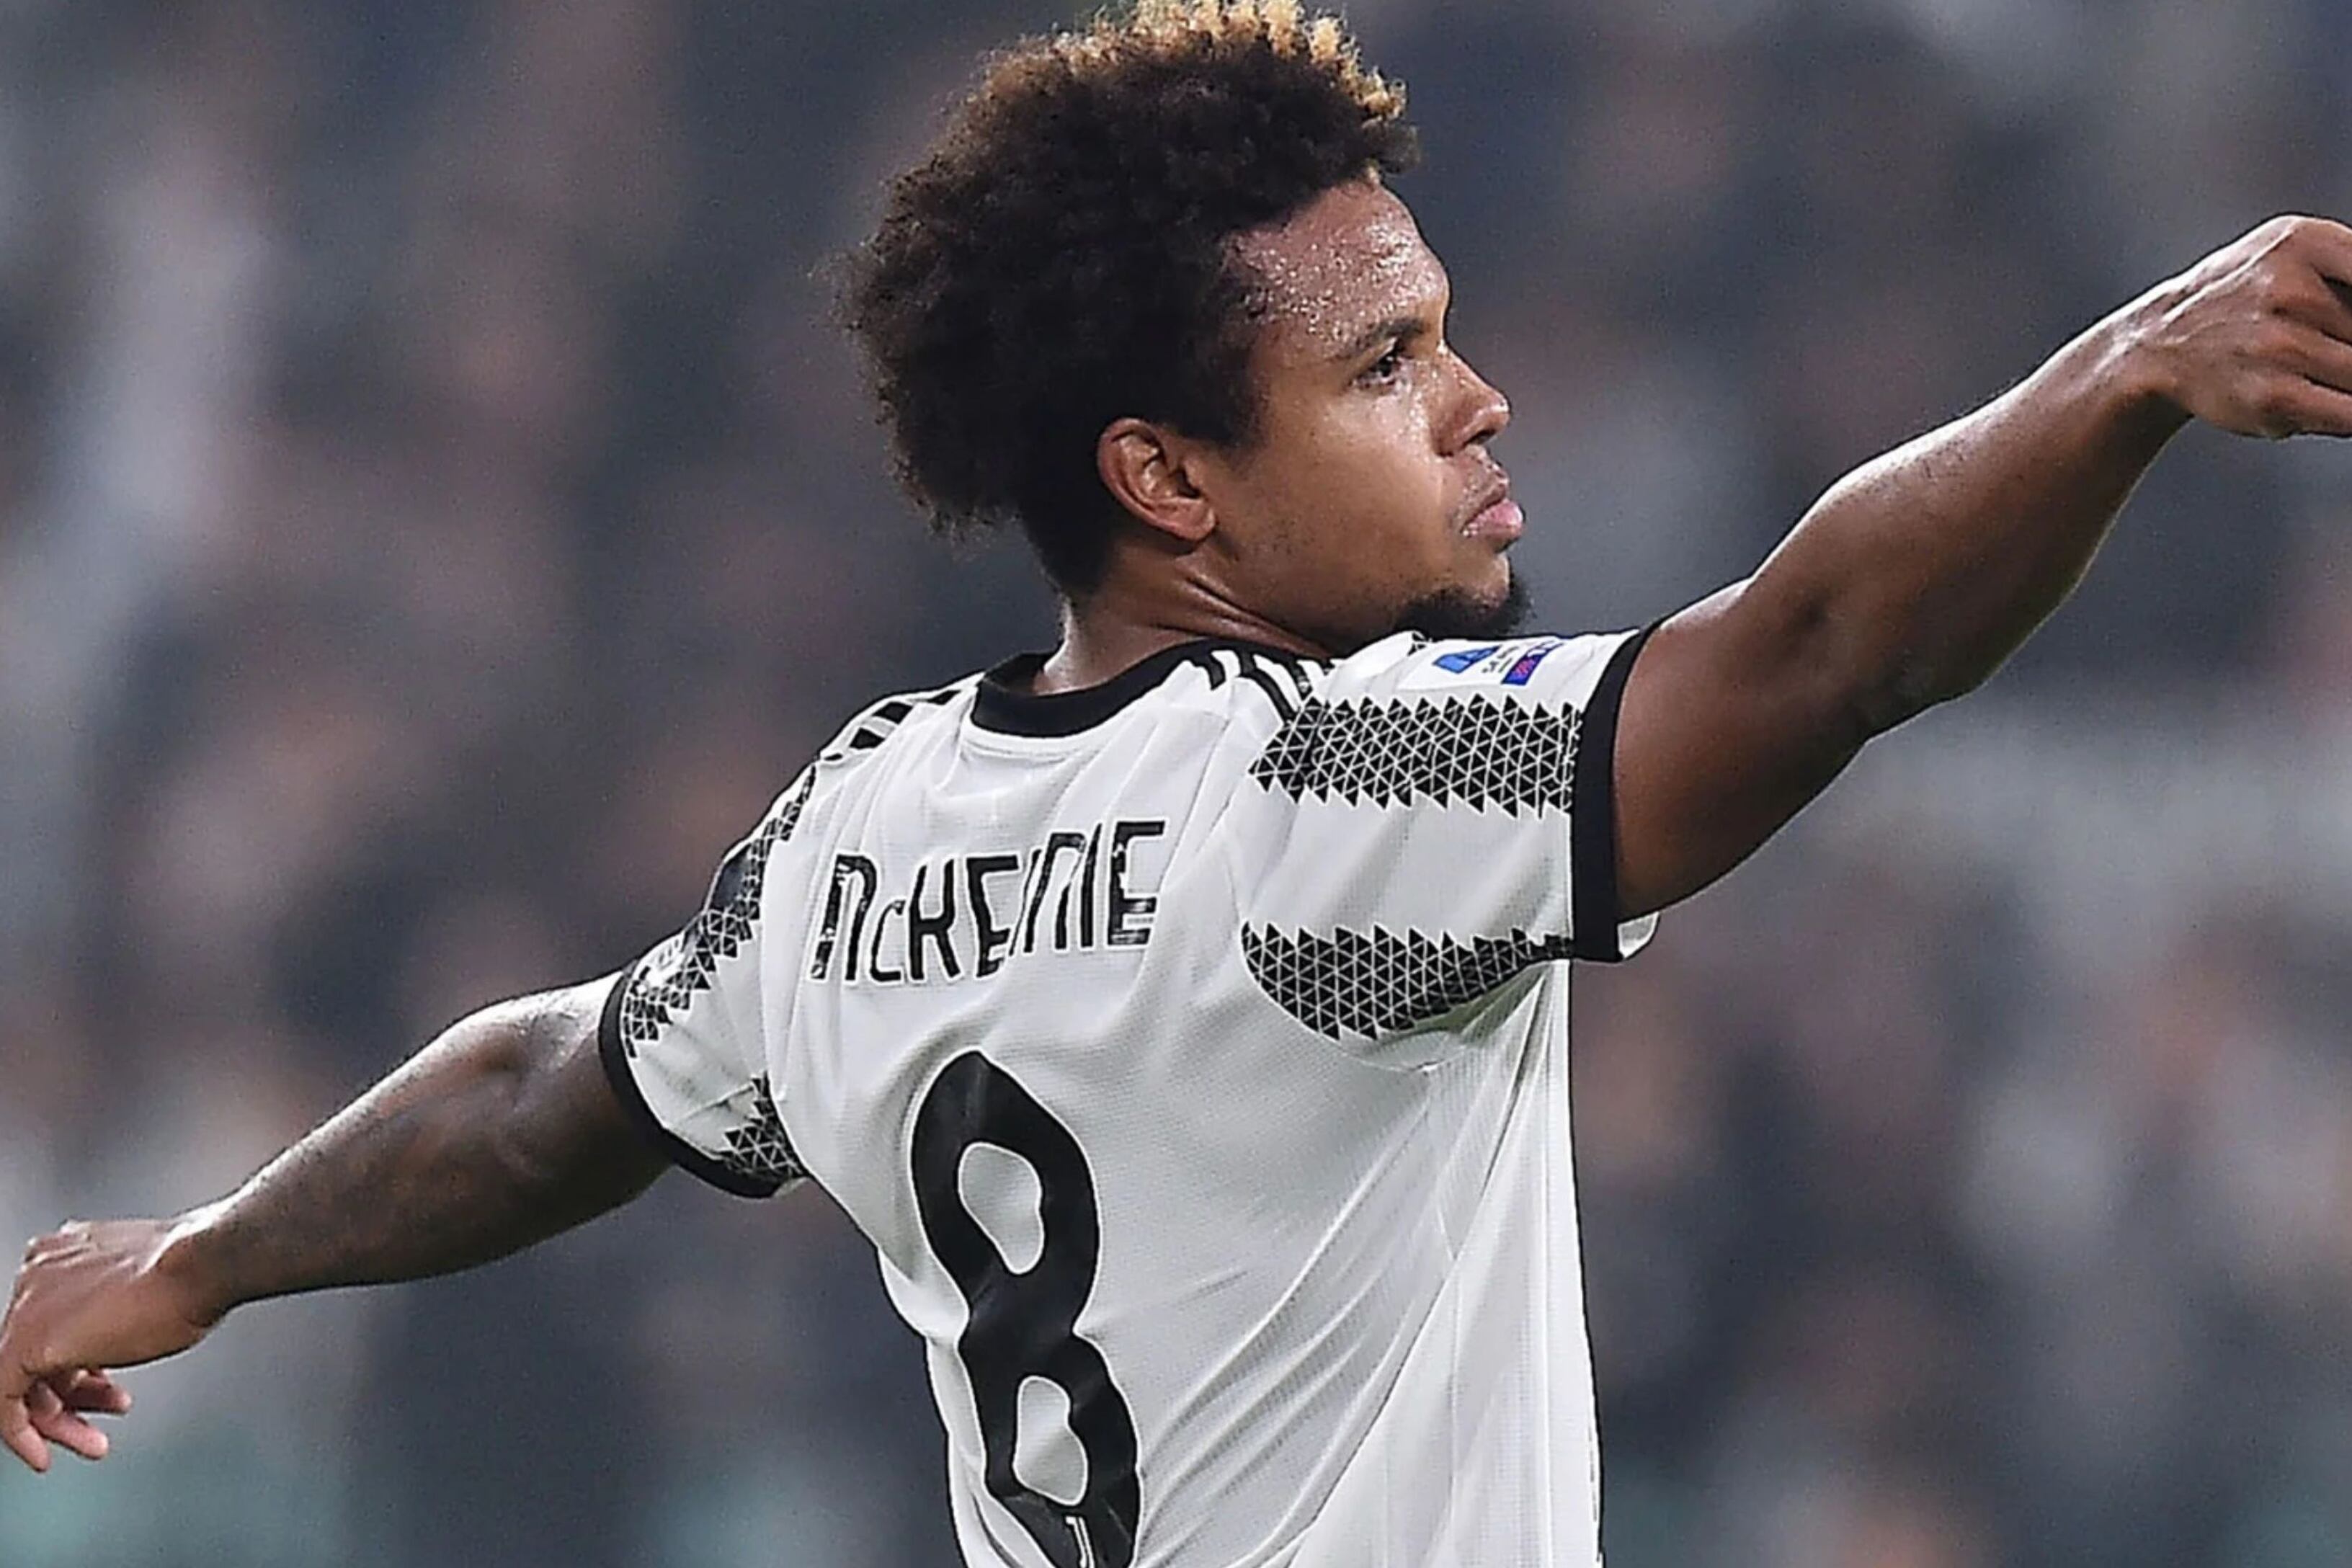 Juventus wants 25 million for McKennie, the club that could pay that figure